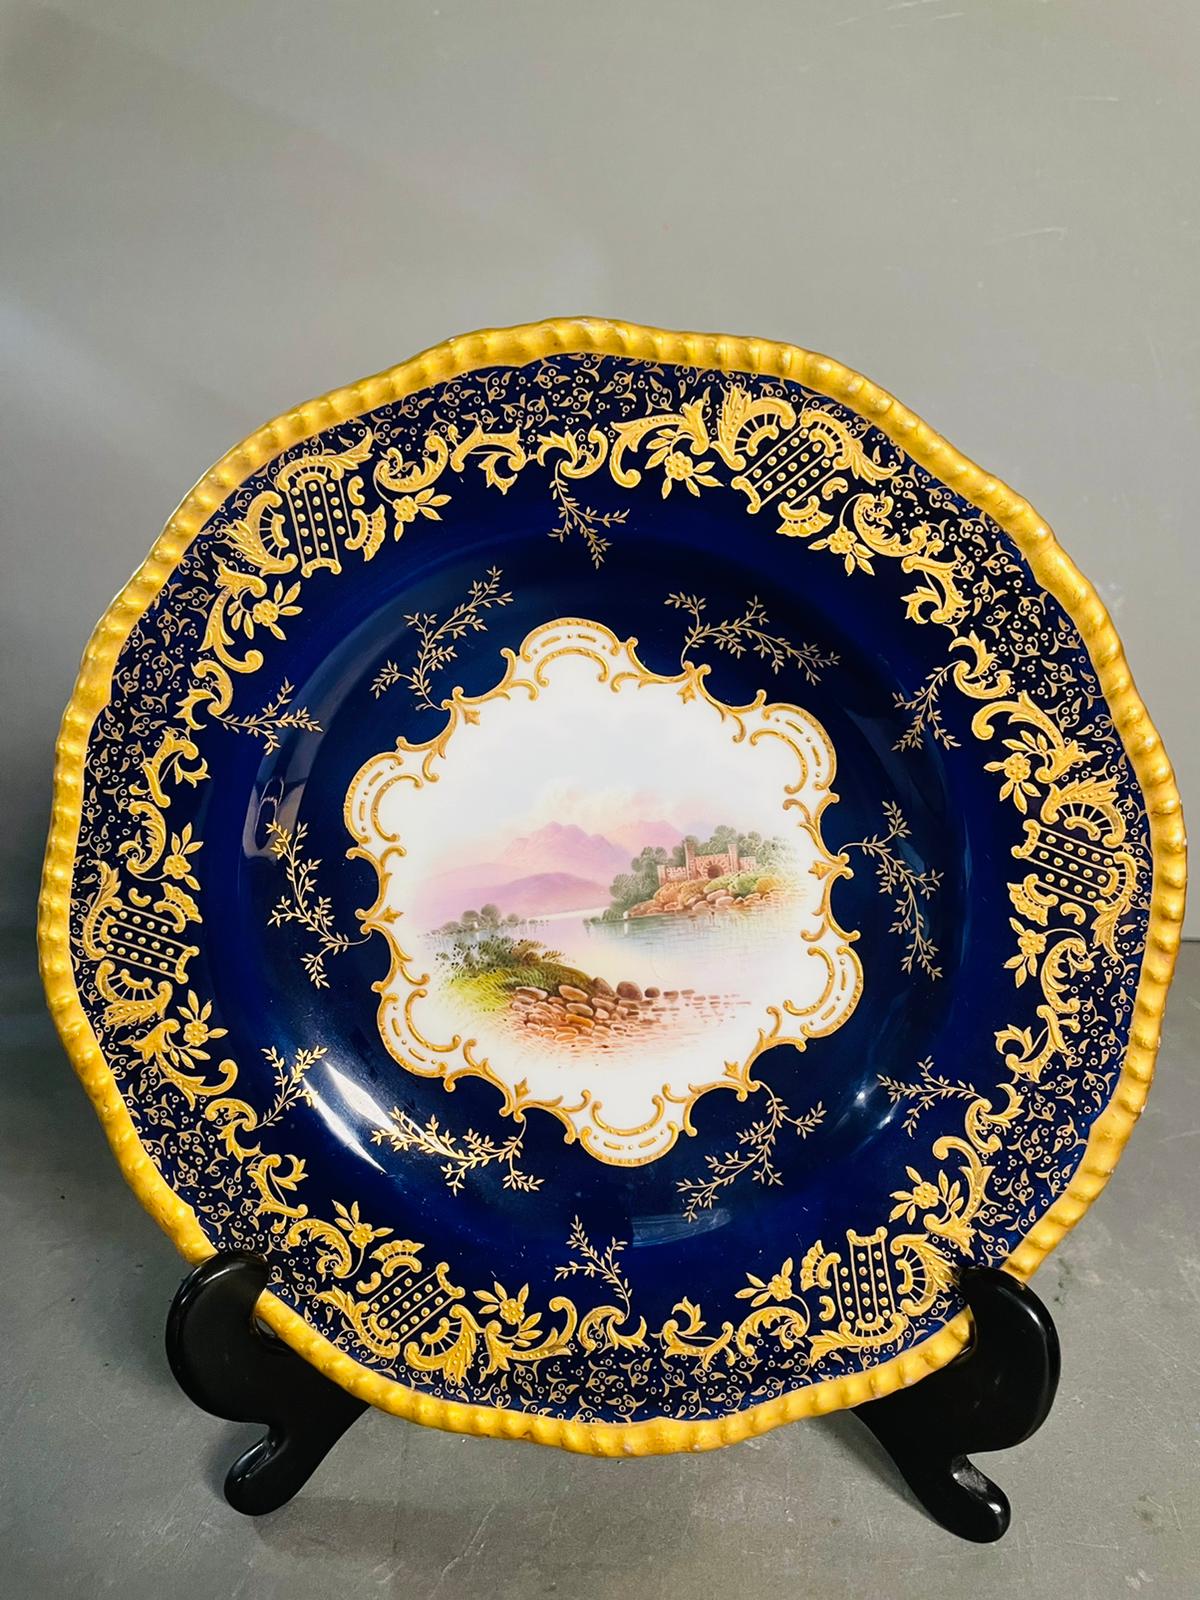 A selection of five early 20th century Coalport hand painted plates with blue grounds, under an acid